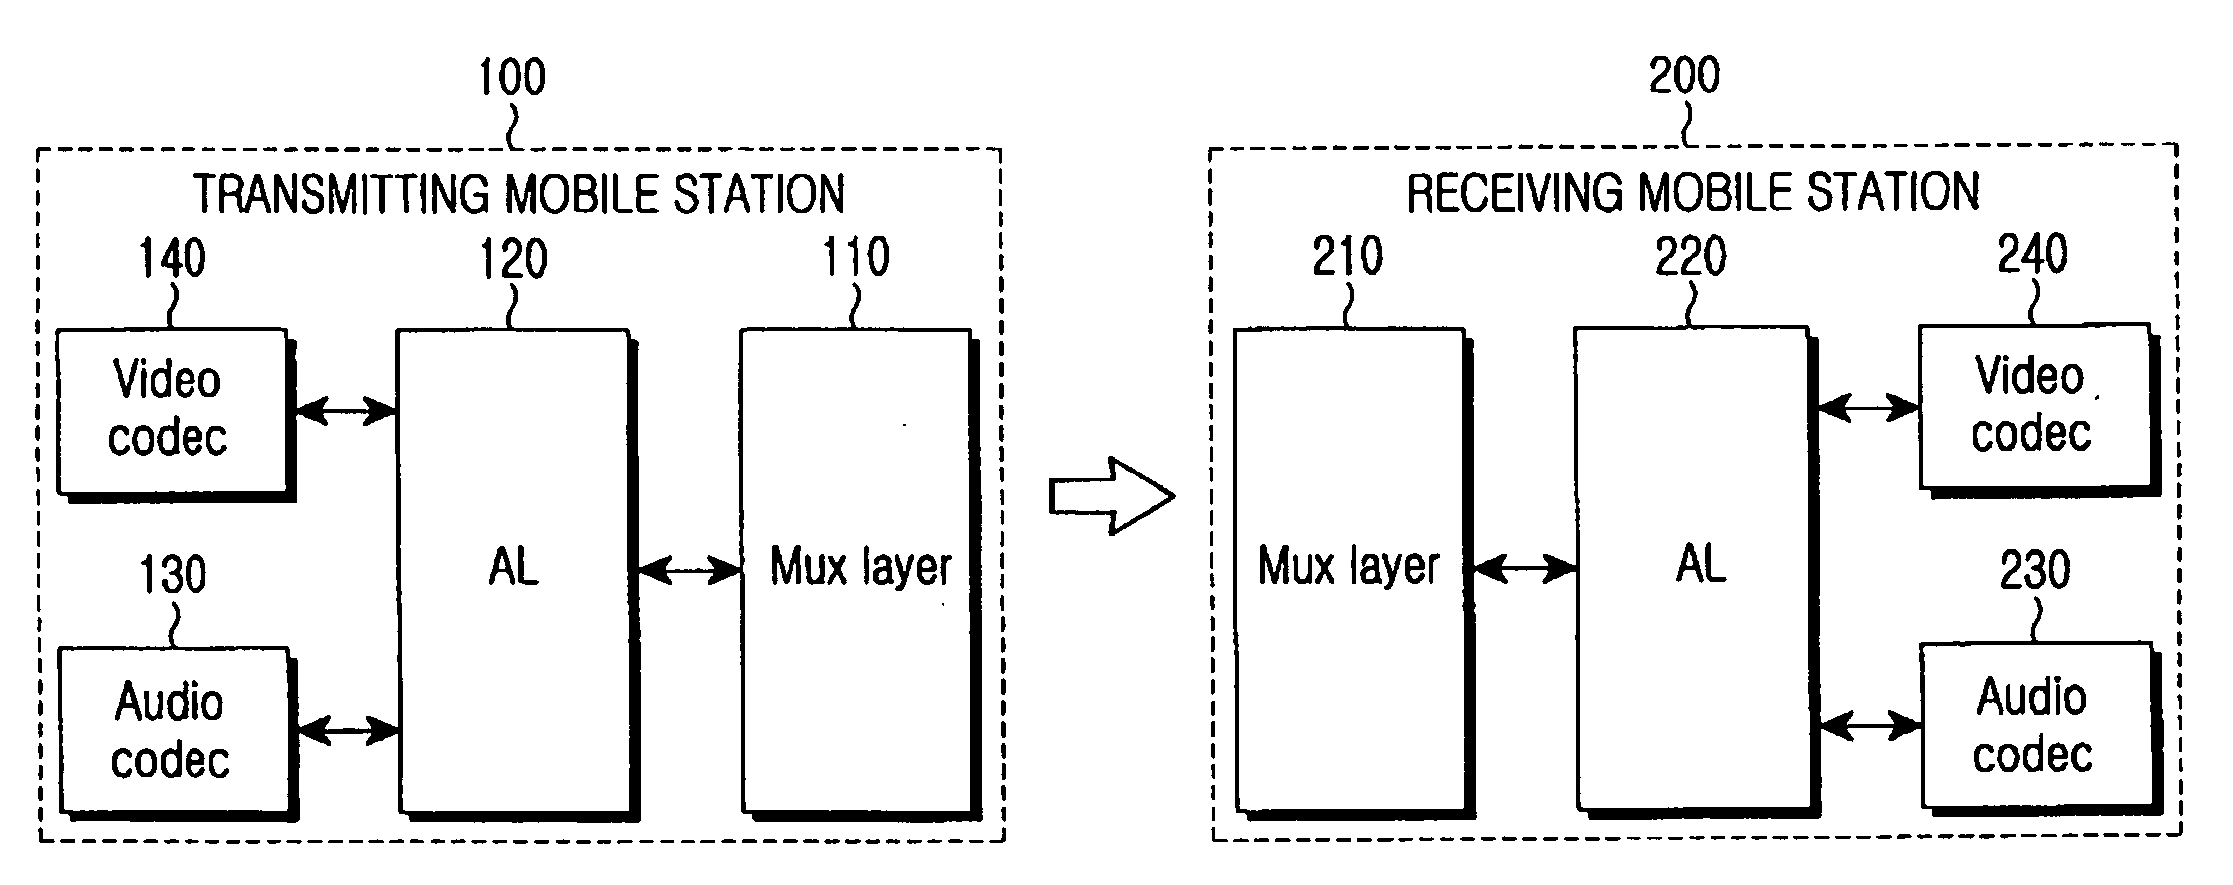 Method of providing video call service in mobile station in a weak signal environment